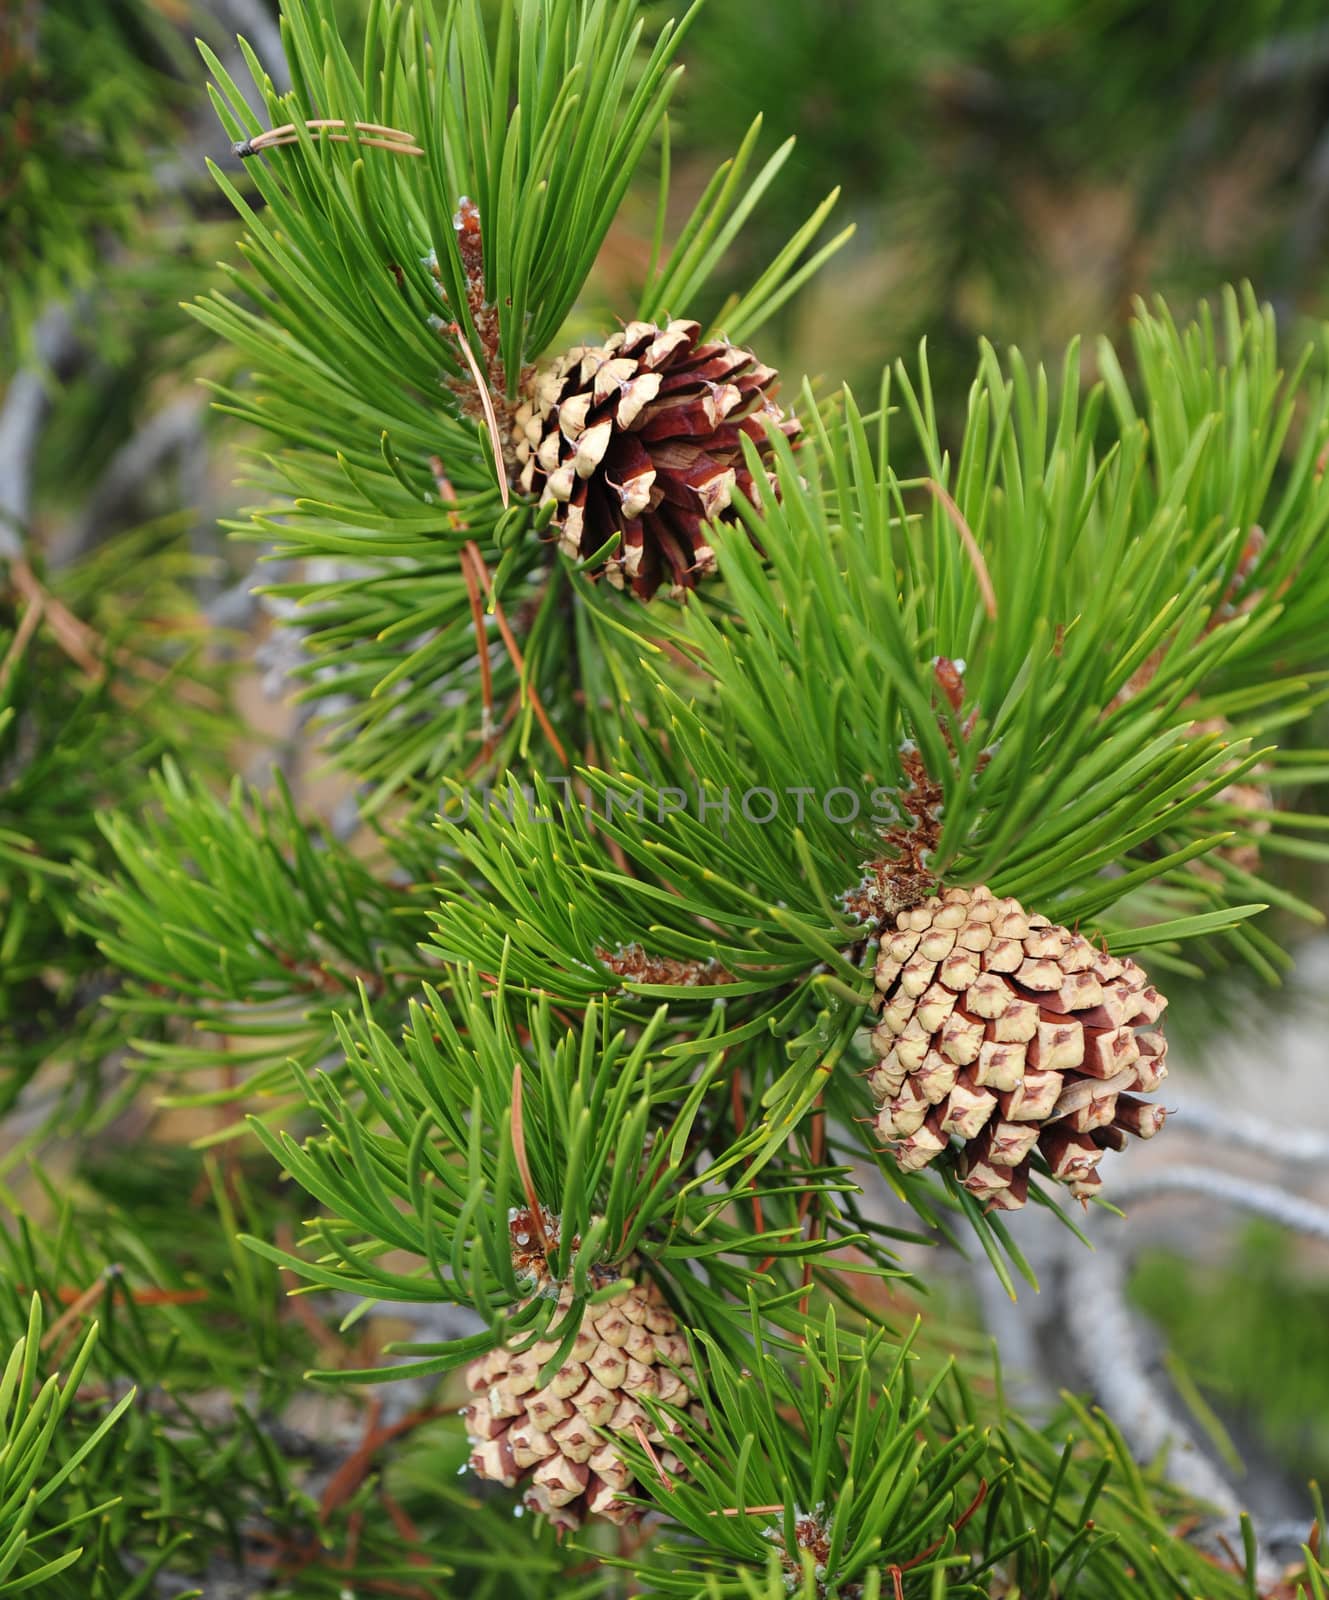 Pine cones starting to open and turn into a mature cone